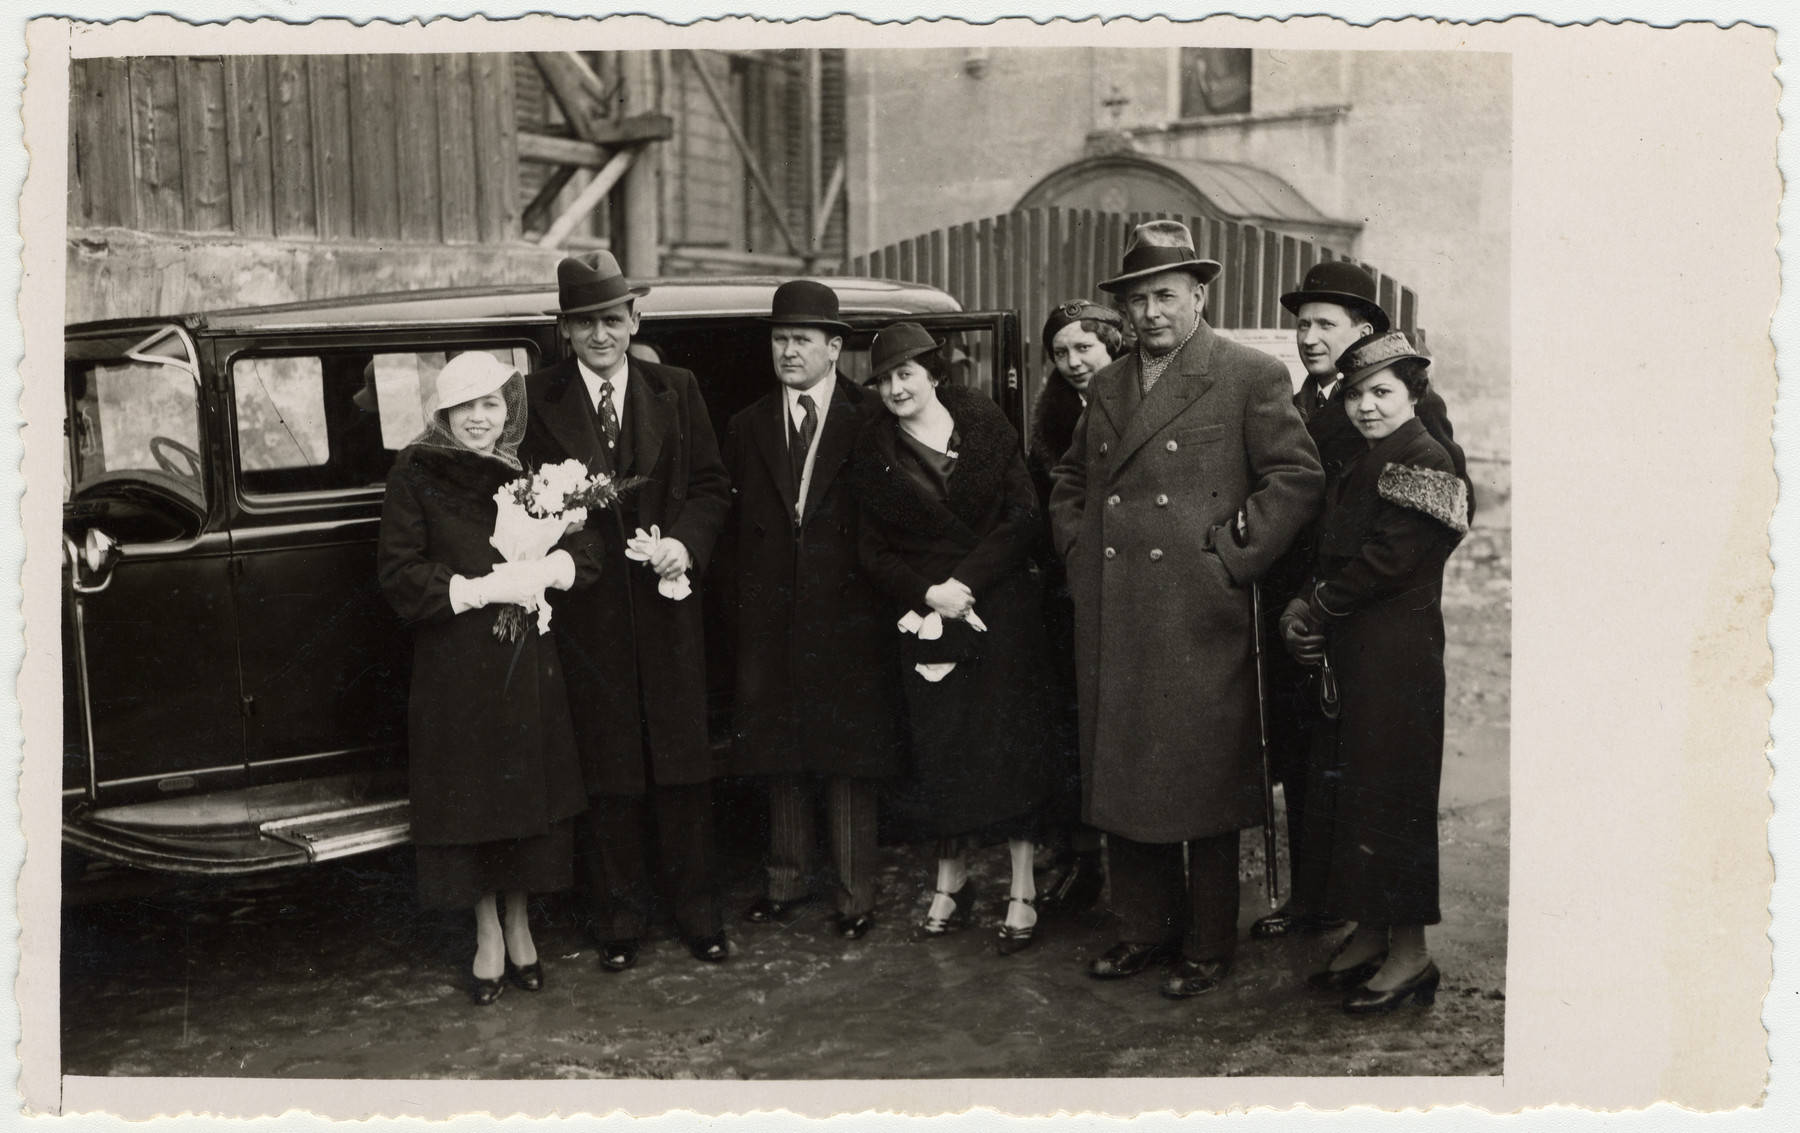 Giustina (Papo) and Jevrem Dragojevic on their wedding day with extended members of the Papo and Dragojevic families.